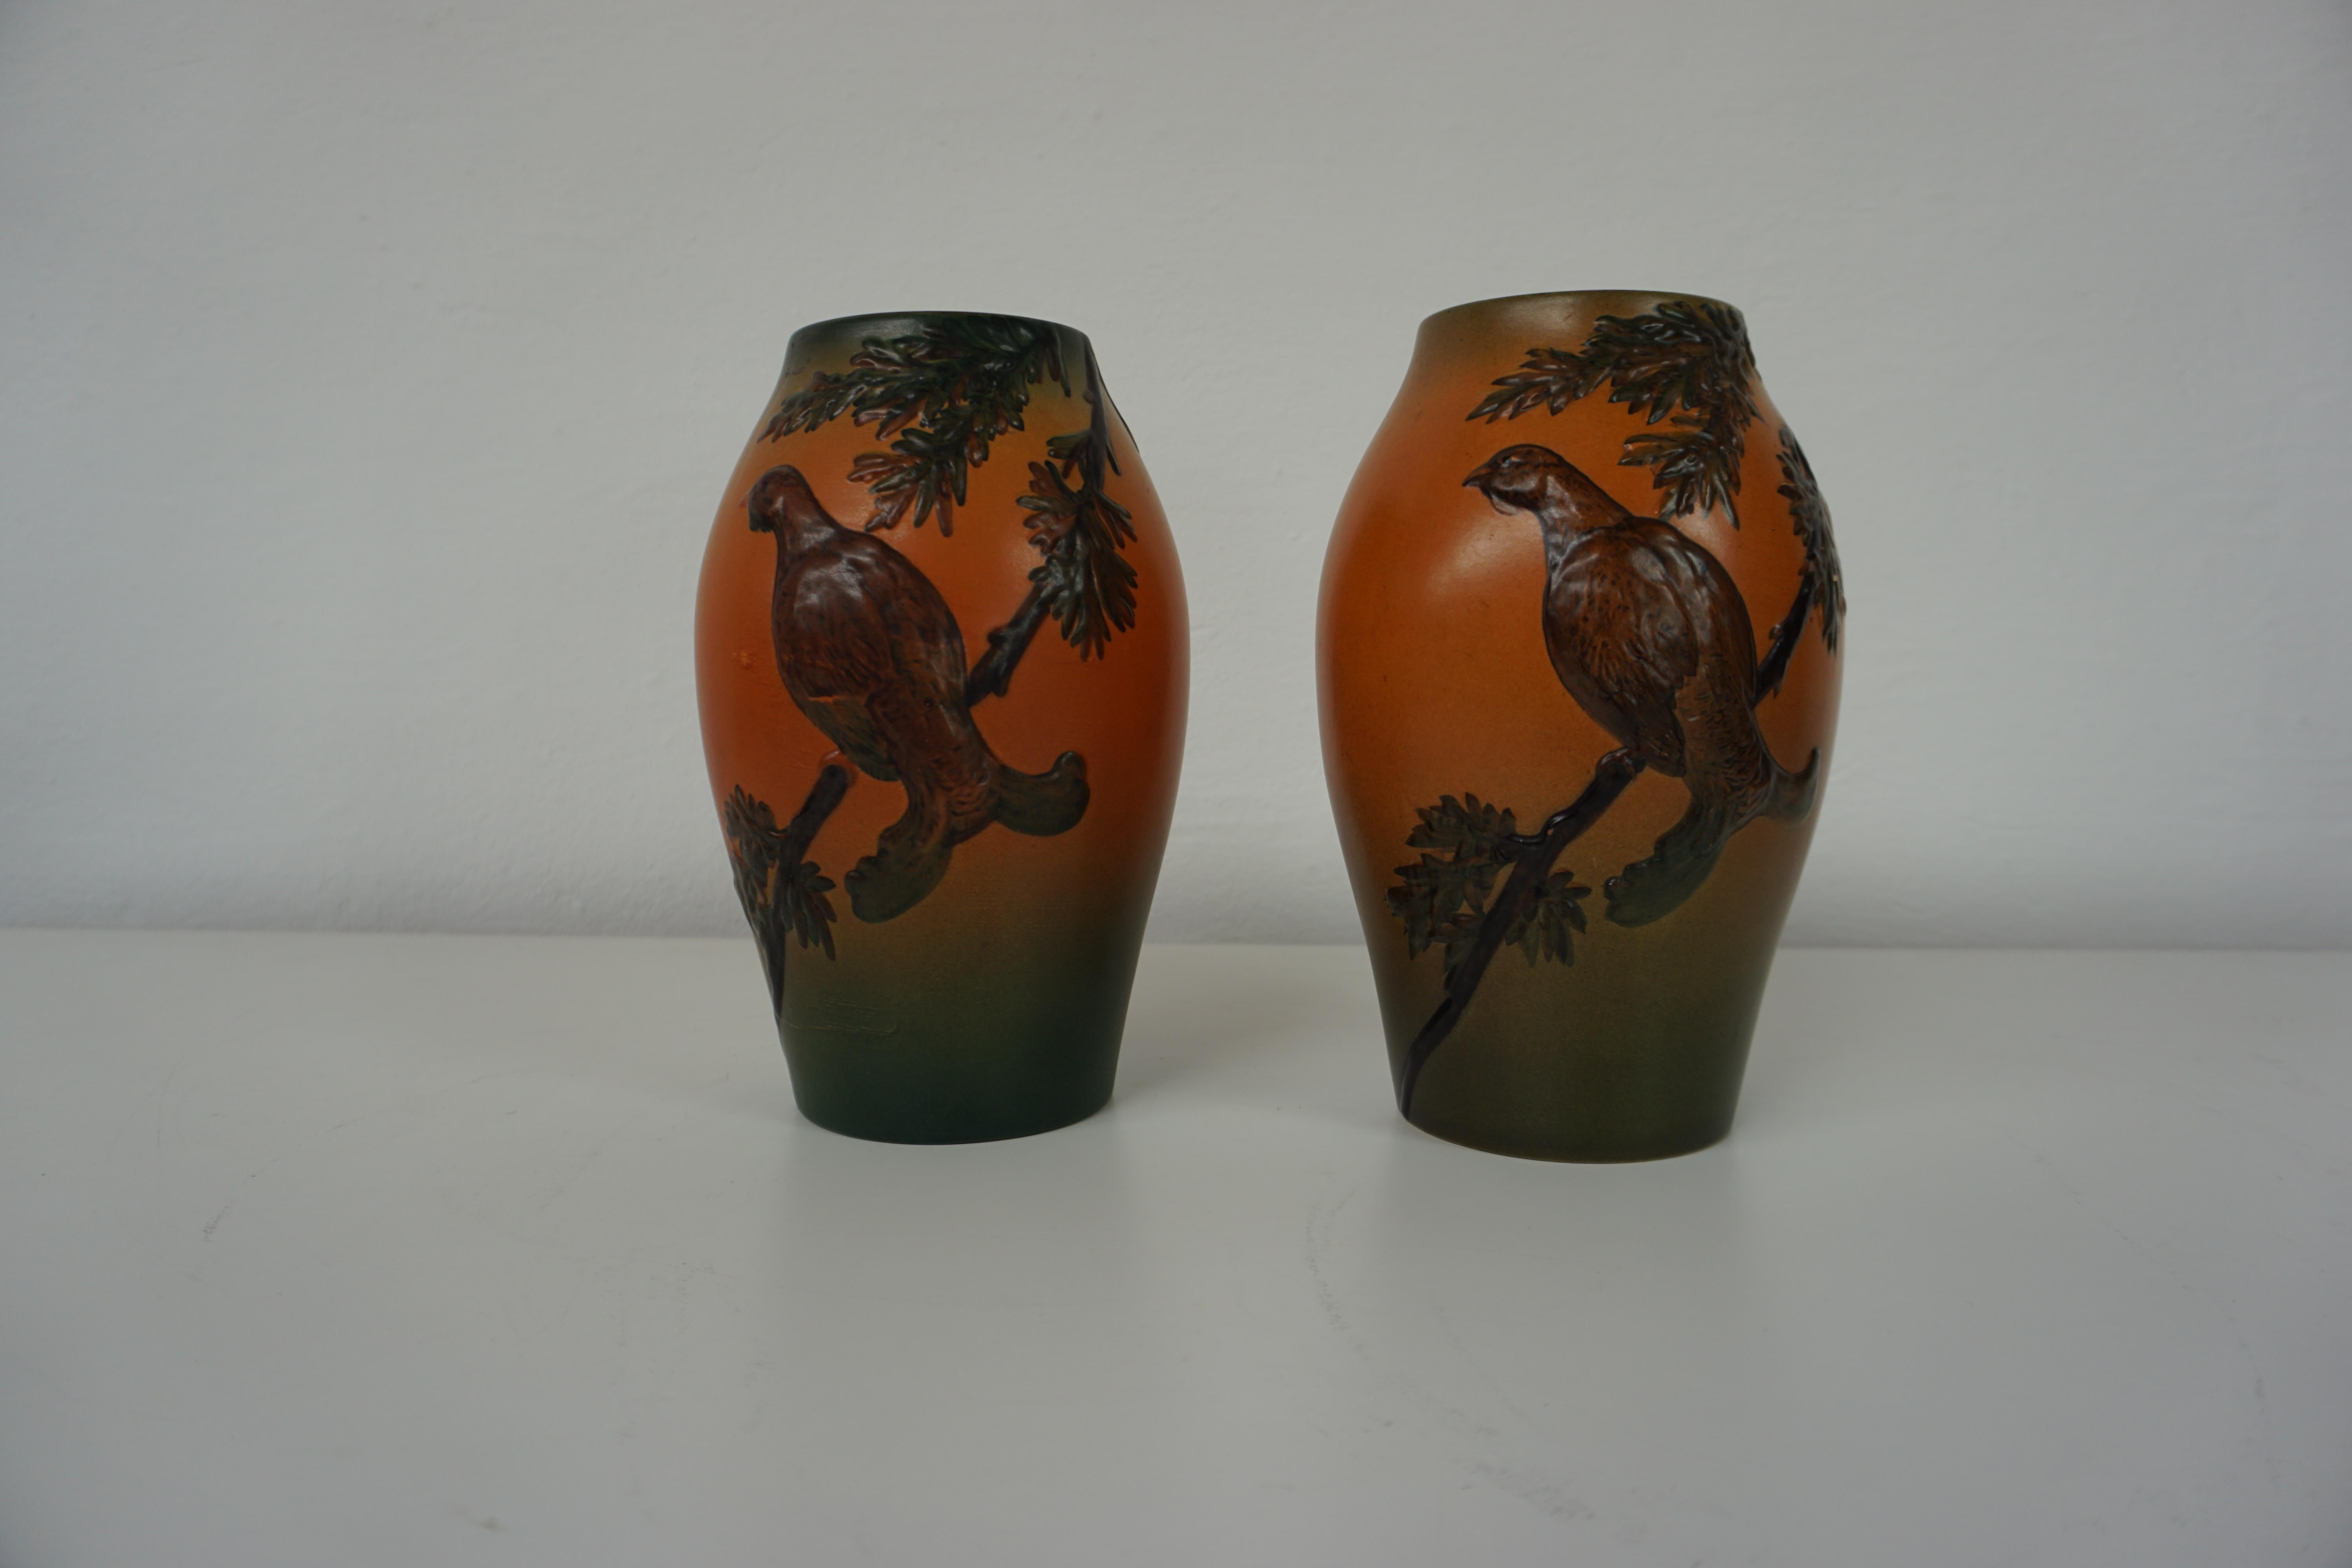 Hand-crafted Danish Art Nouveau flower decorated vases by West in 1927 for P. Ipsens Enke

The art nouveau vases feature very black grouses with branches and leafs are in very good condition.

P. Ipsens Enke (1843 - 1955) was a very succesfull